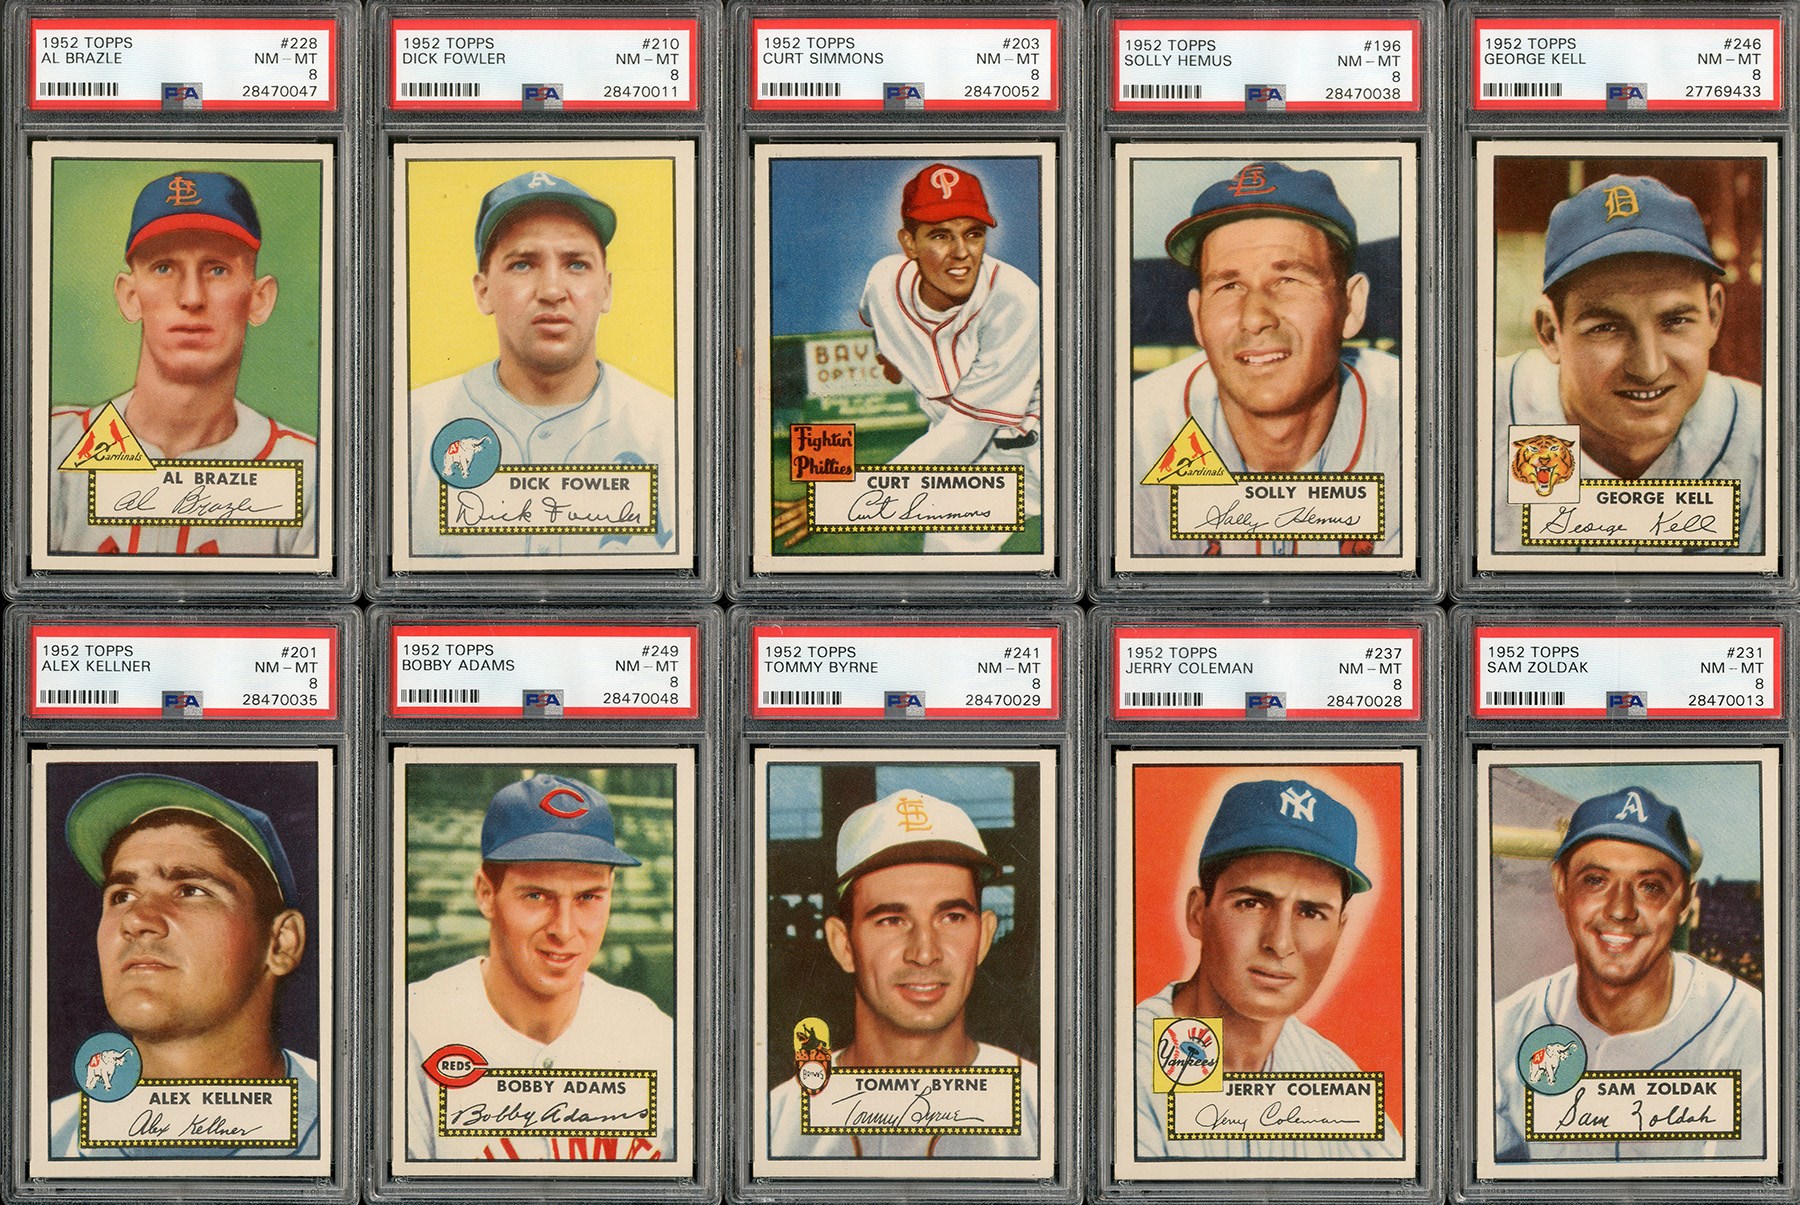 1952 Topps HIGH GRADE Collection of 12 Cards - All PSA Graded NM-MT 8!